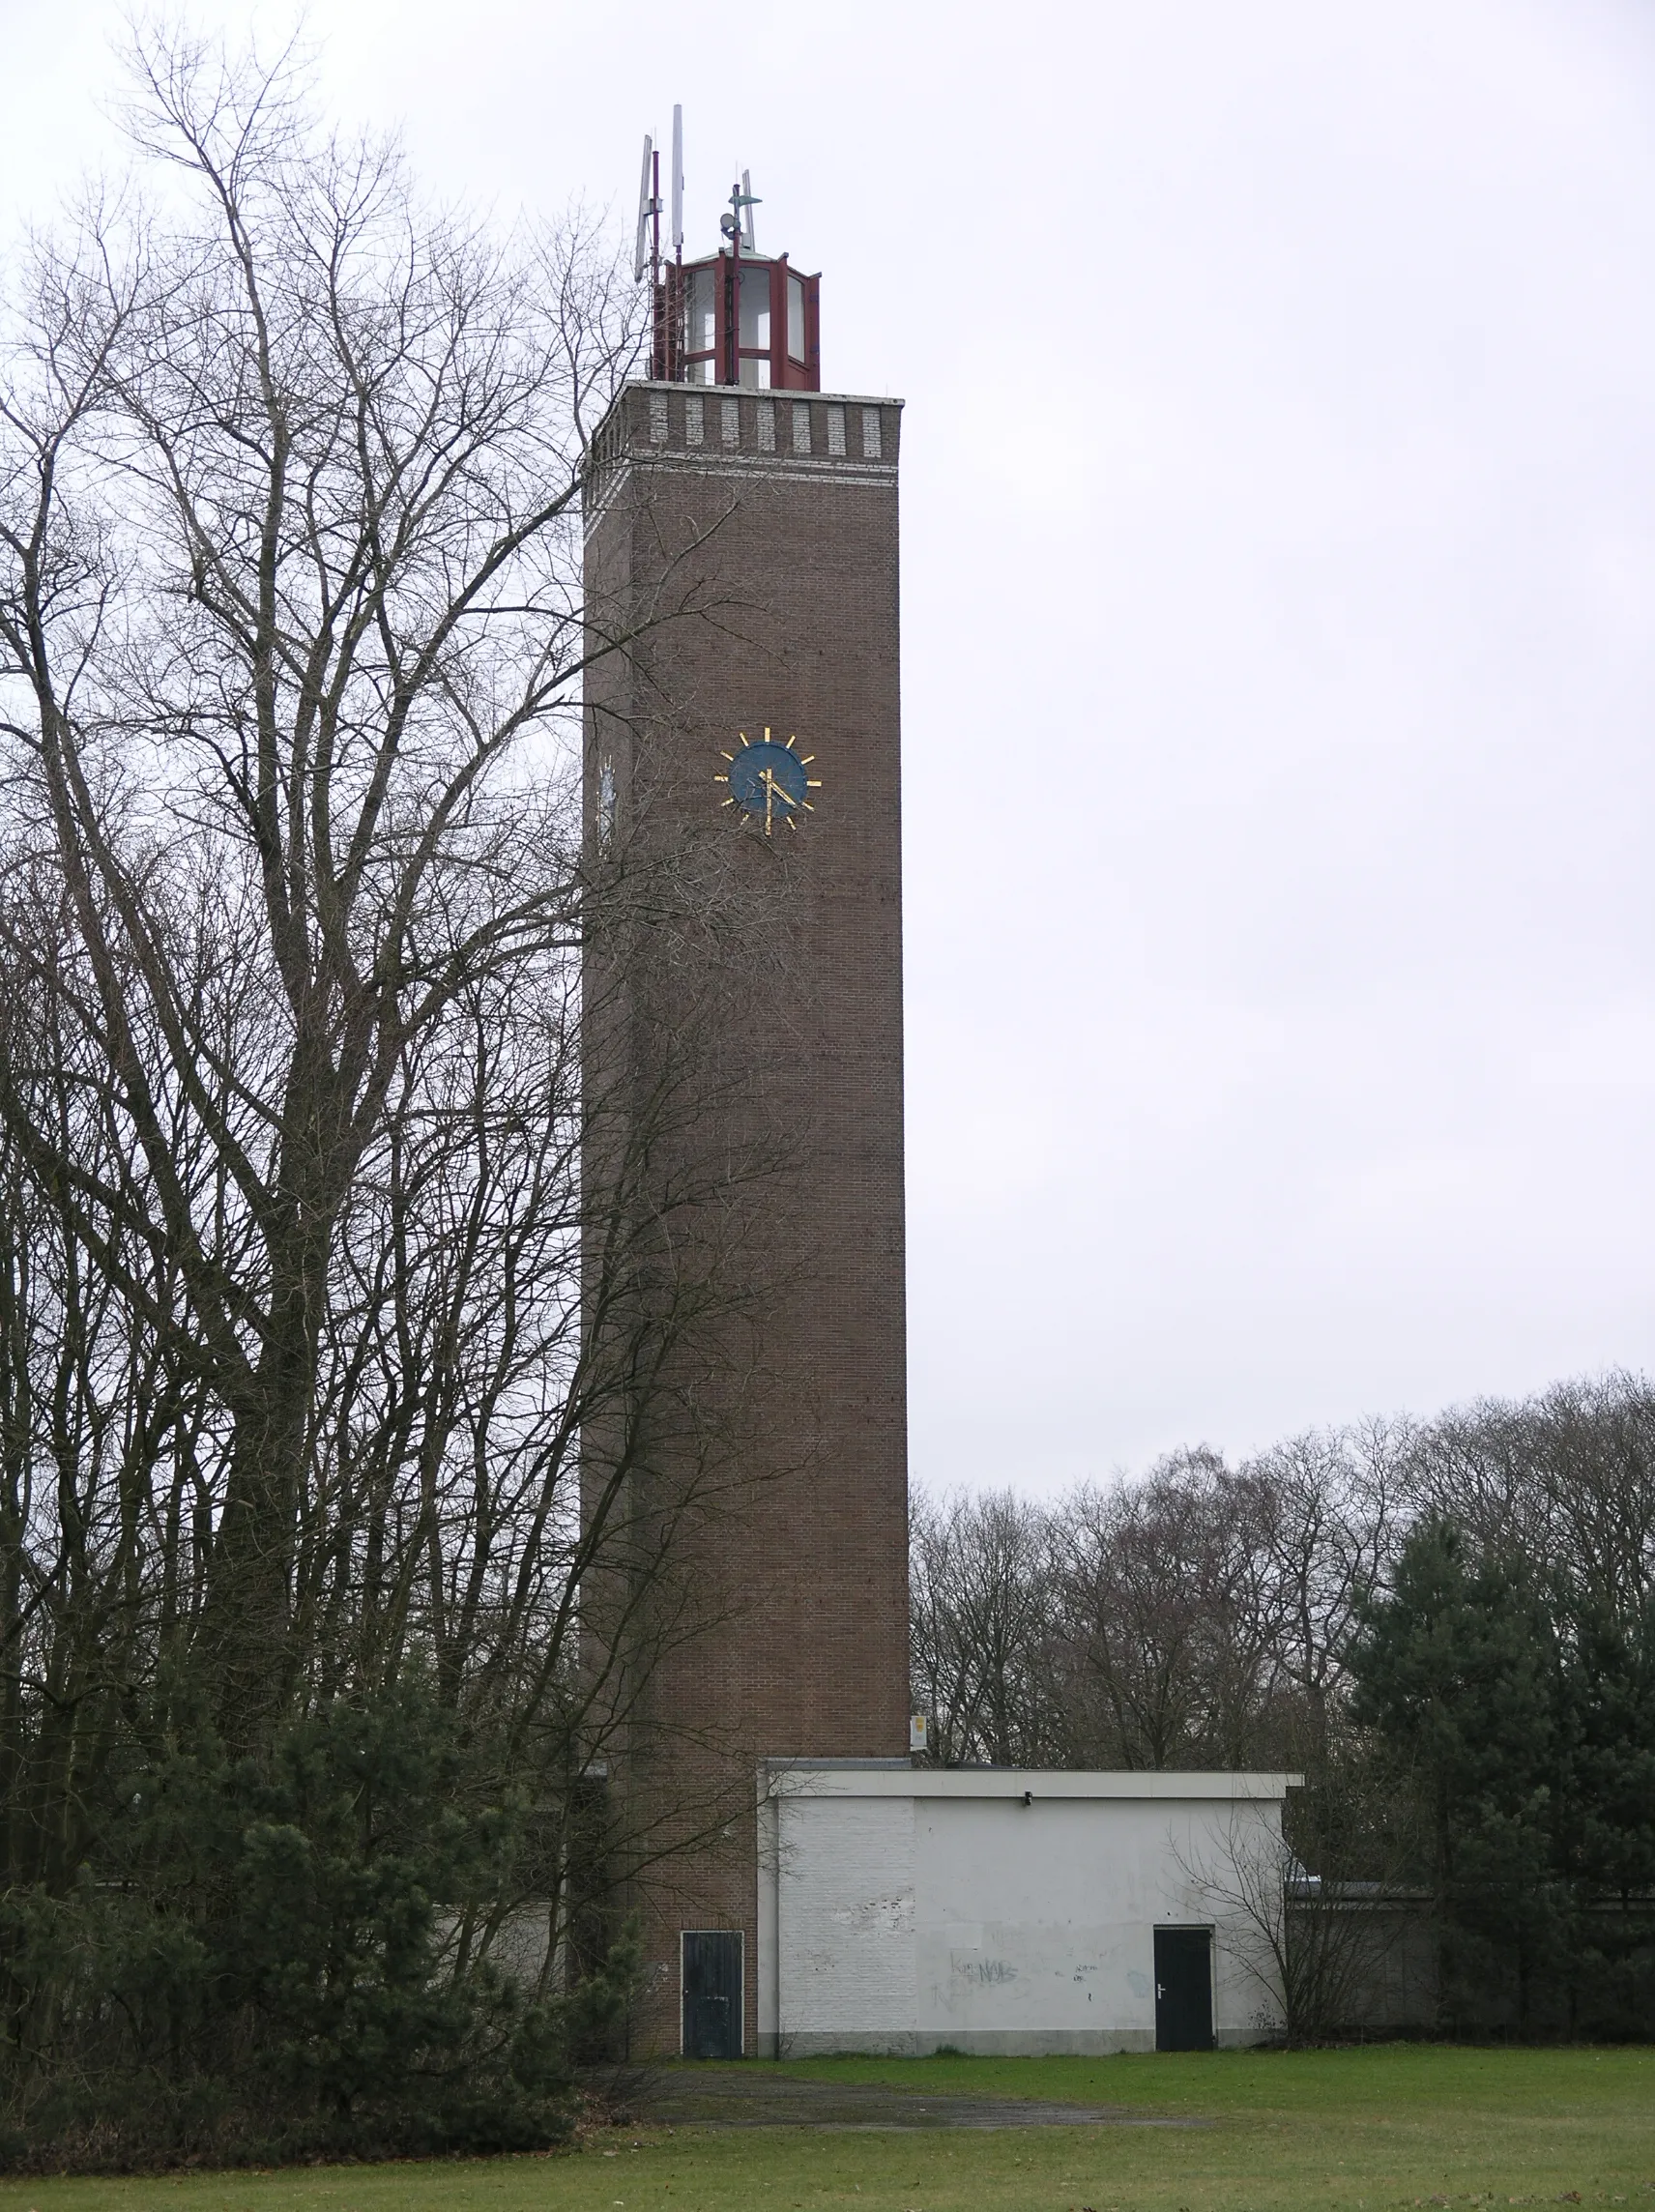 Photo showing: This is an image of a municipal monument in Utrechtse Heuvelrug with number